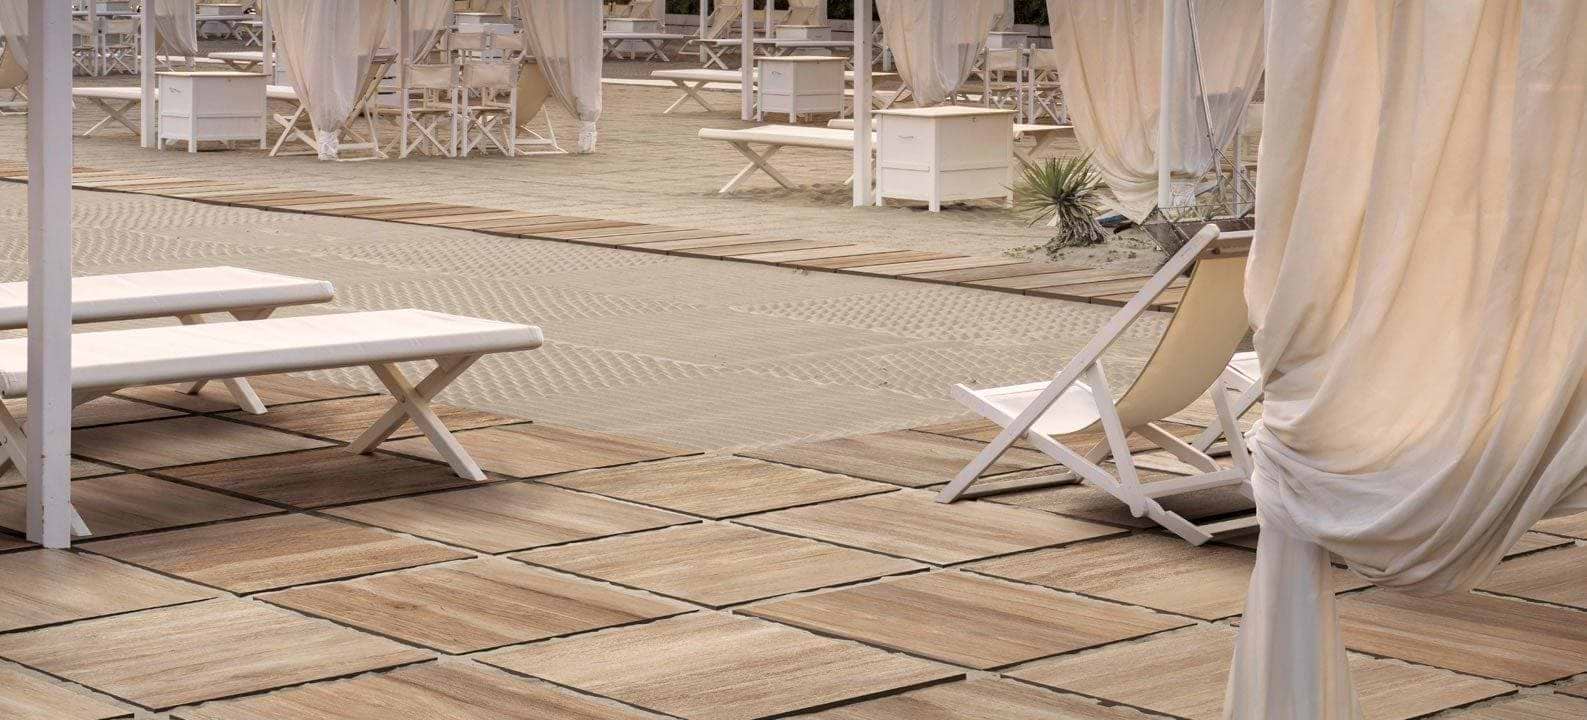 Travelling Outdoor – South Gold 20mm - Hyperion Tiles